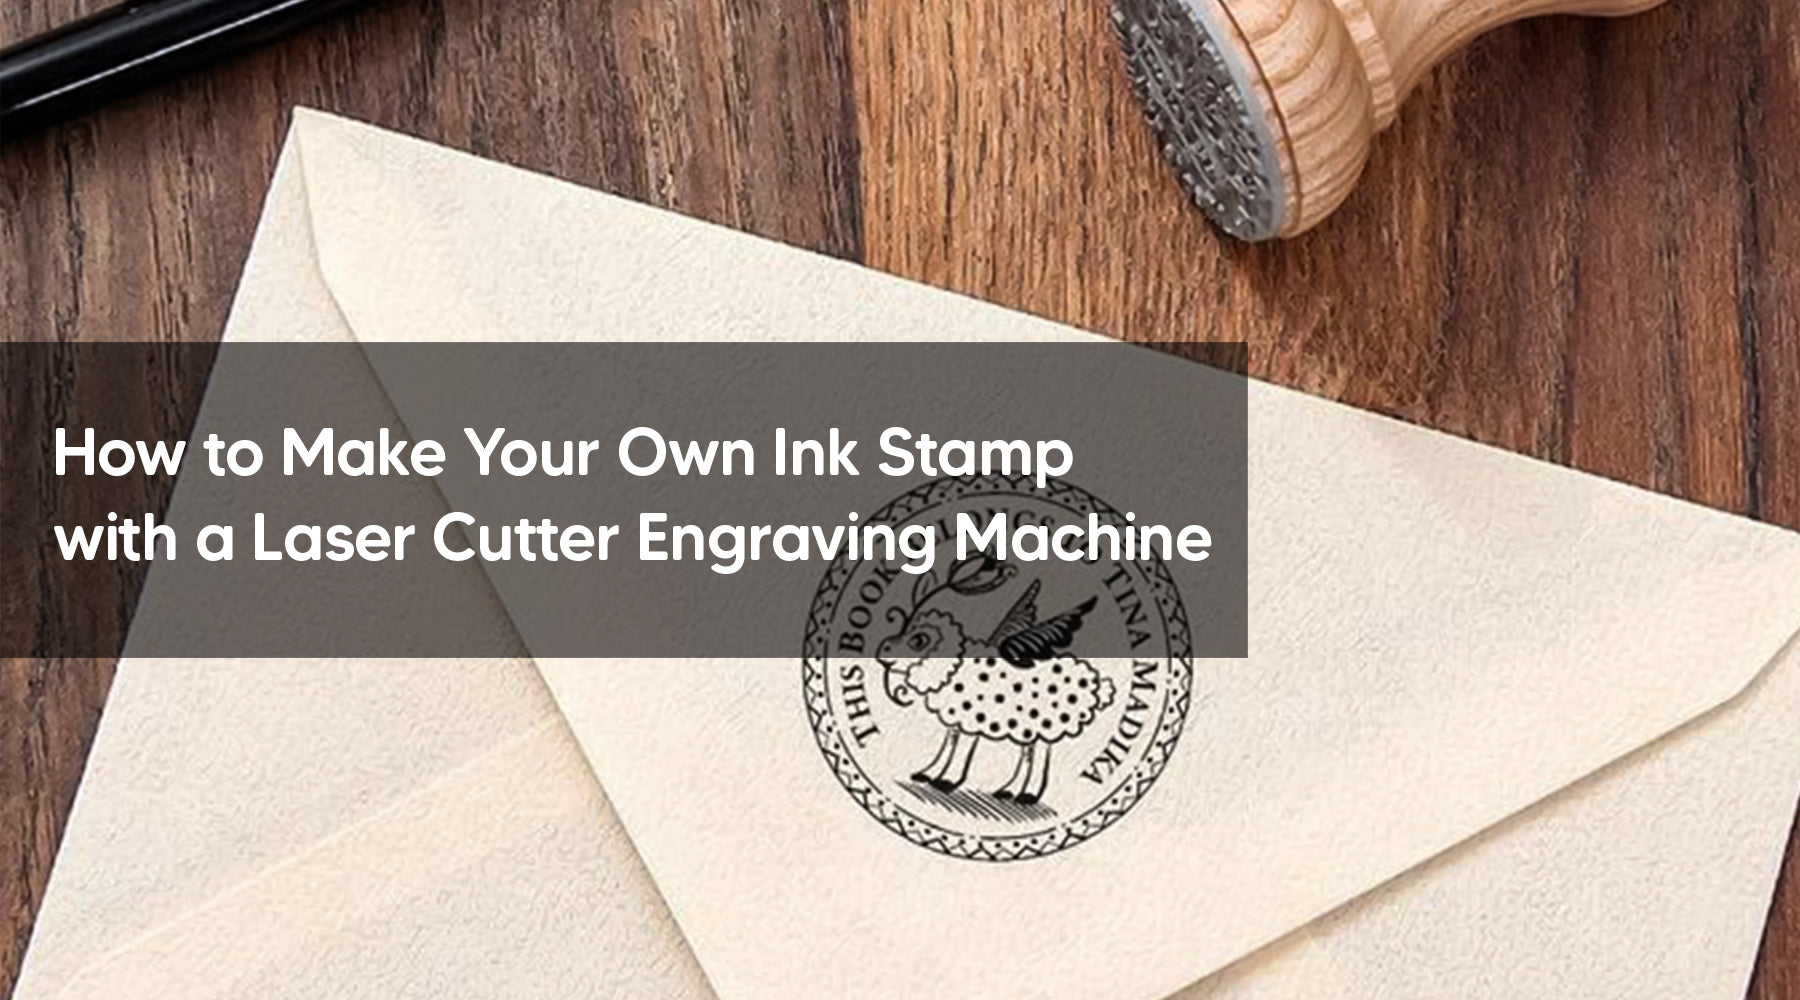 How to Make Your Own Ink Stamp with a Laser Cutter Engraving Machine